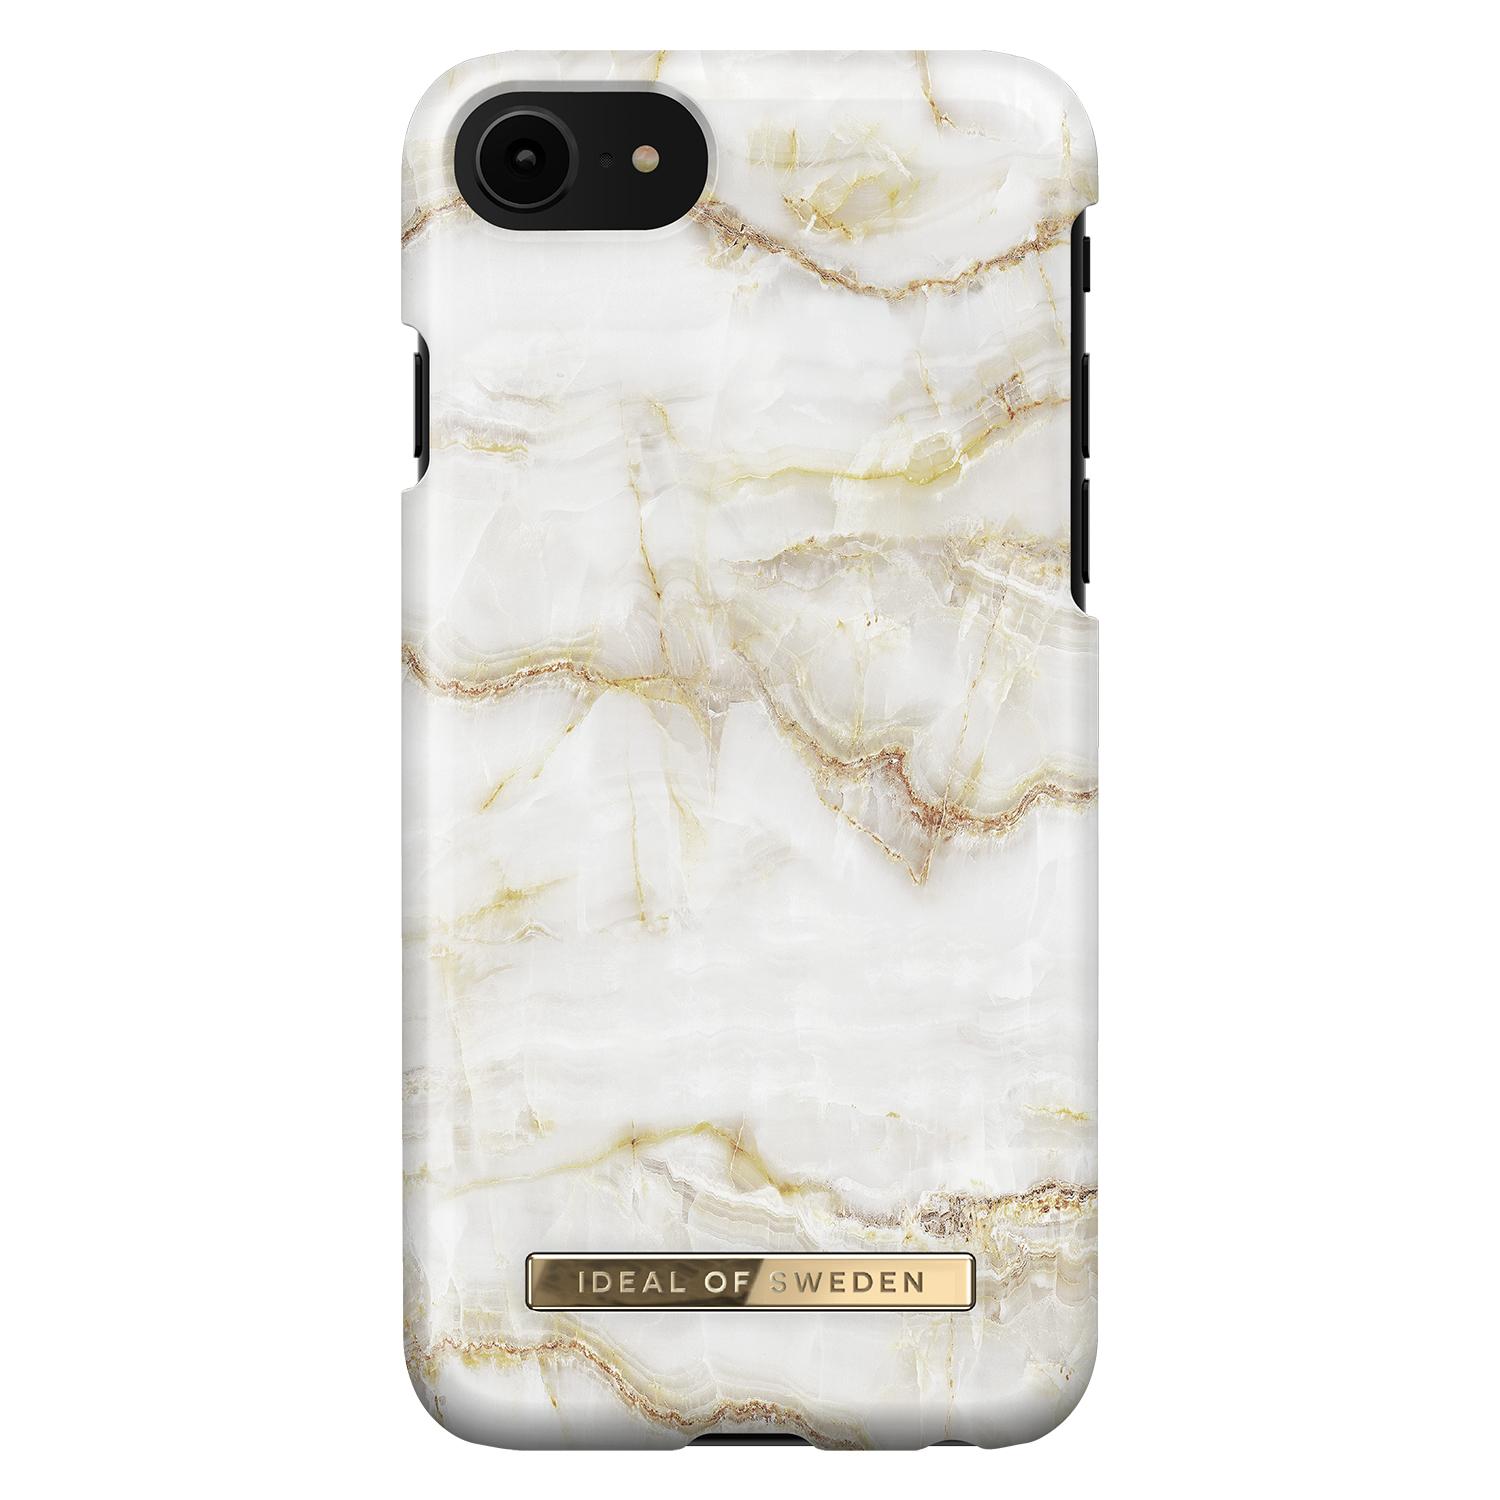 Fashion Case iPhone 6/6S/7/8/SE 2020 Golden Pearl Marble